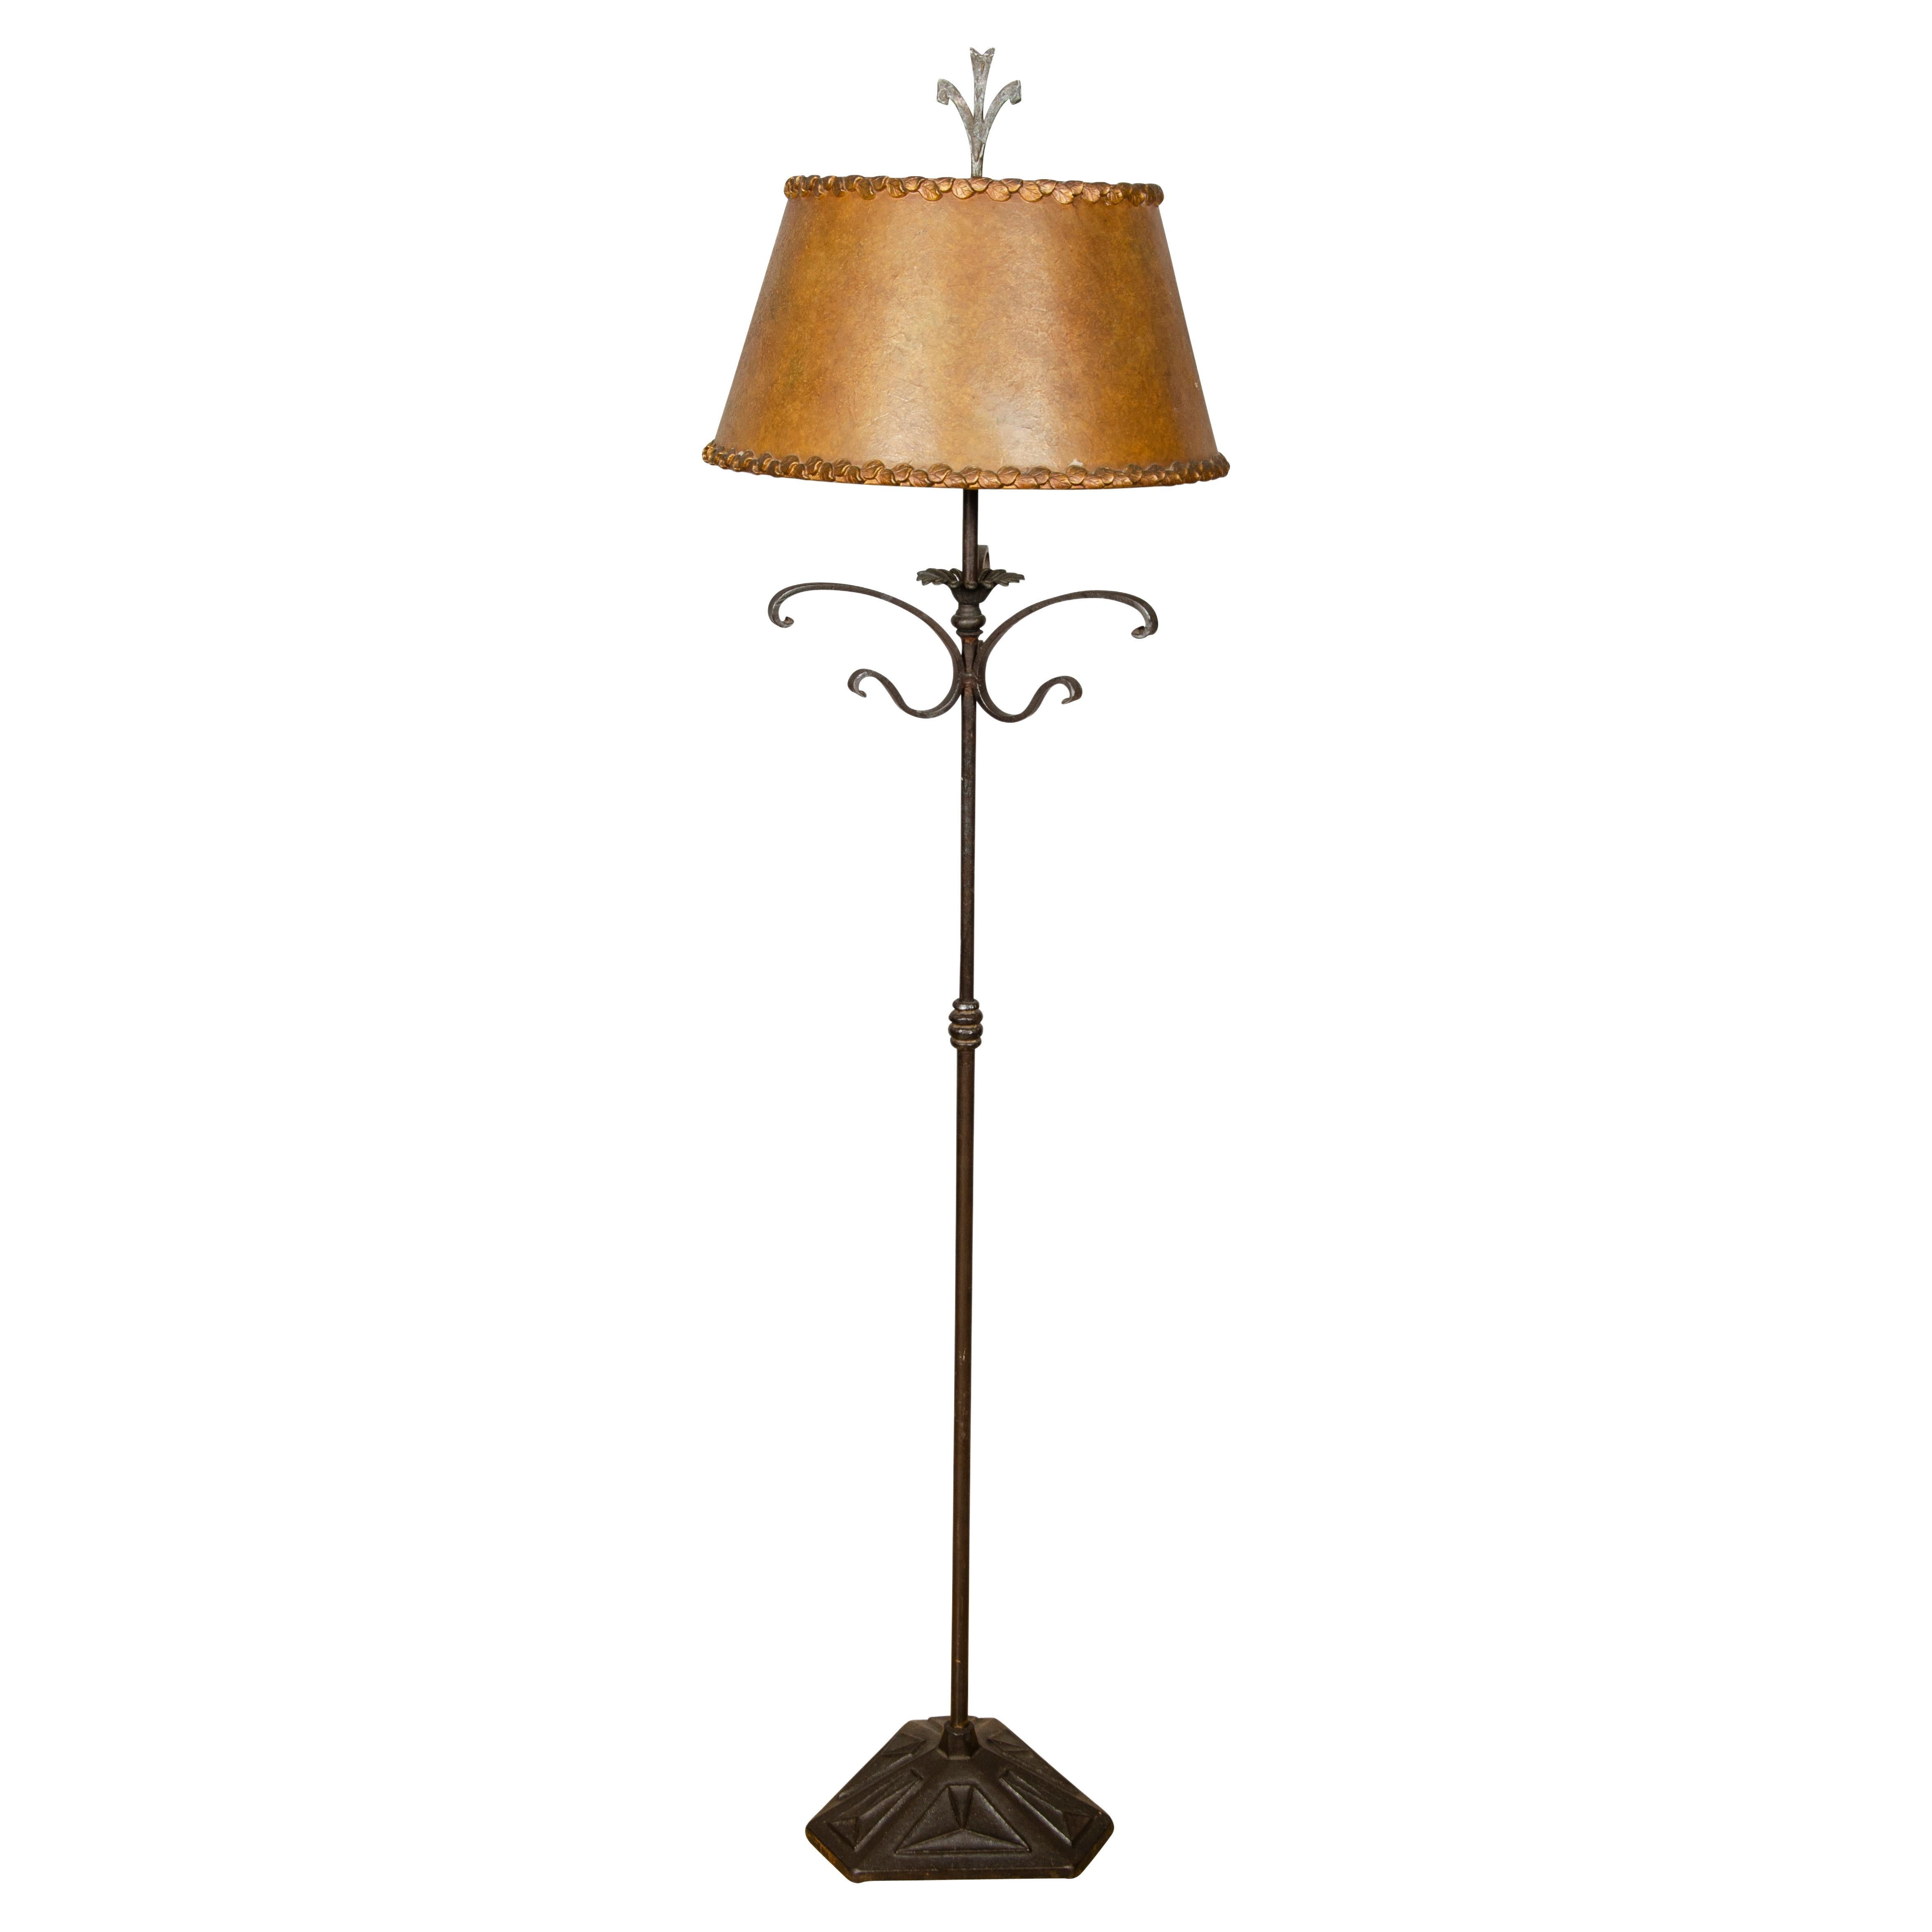 Arts & Crafts Wrought Iron and Mica Floor Lamp